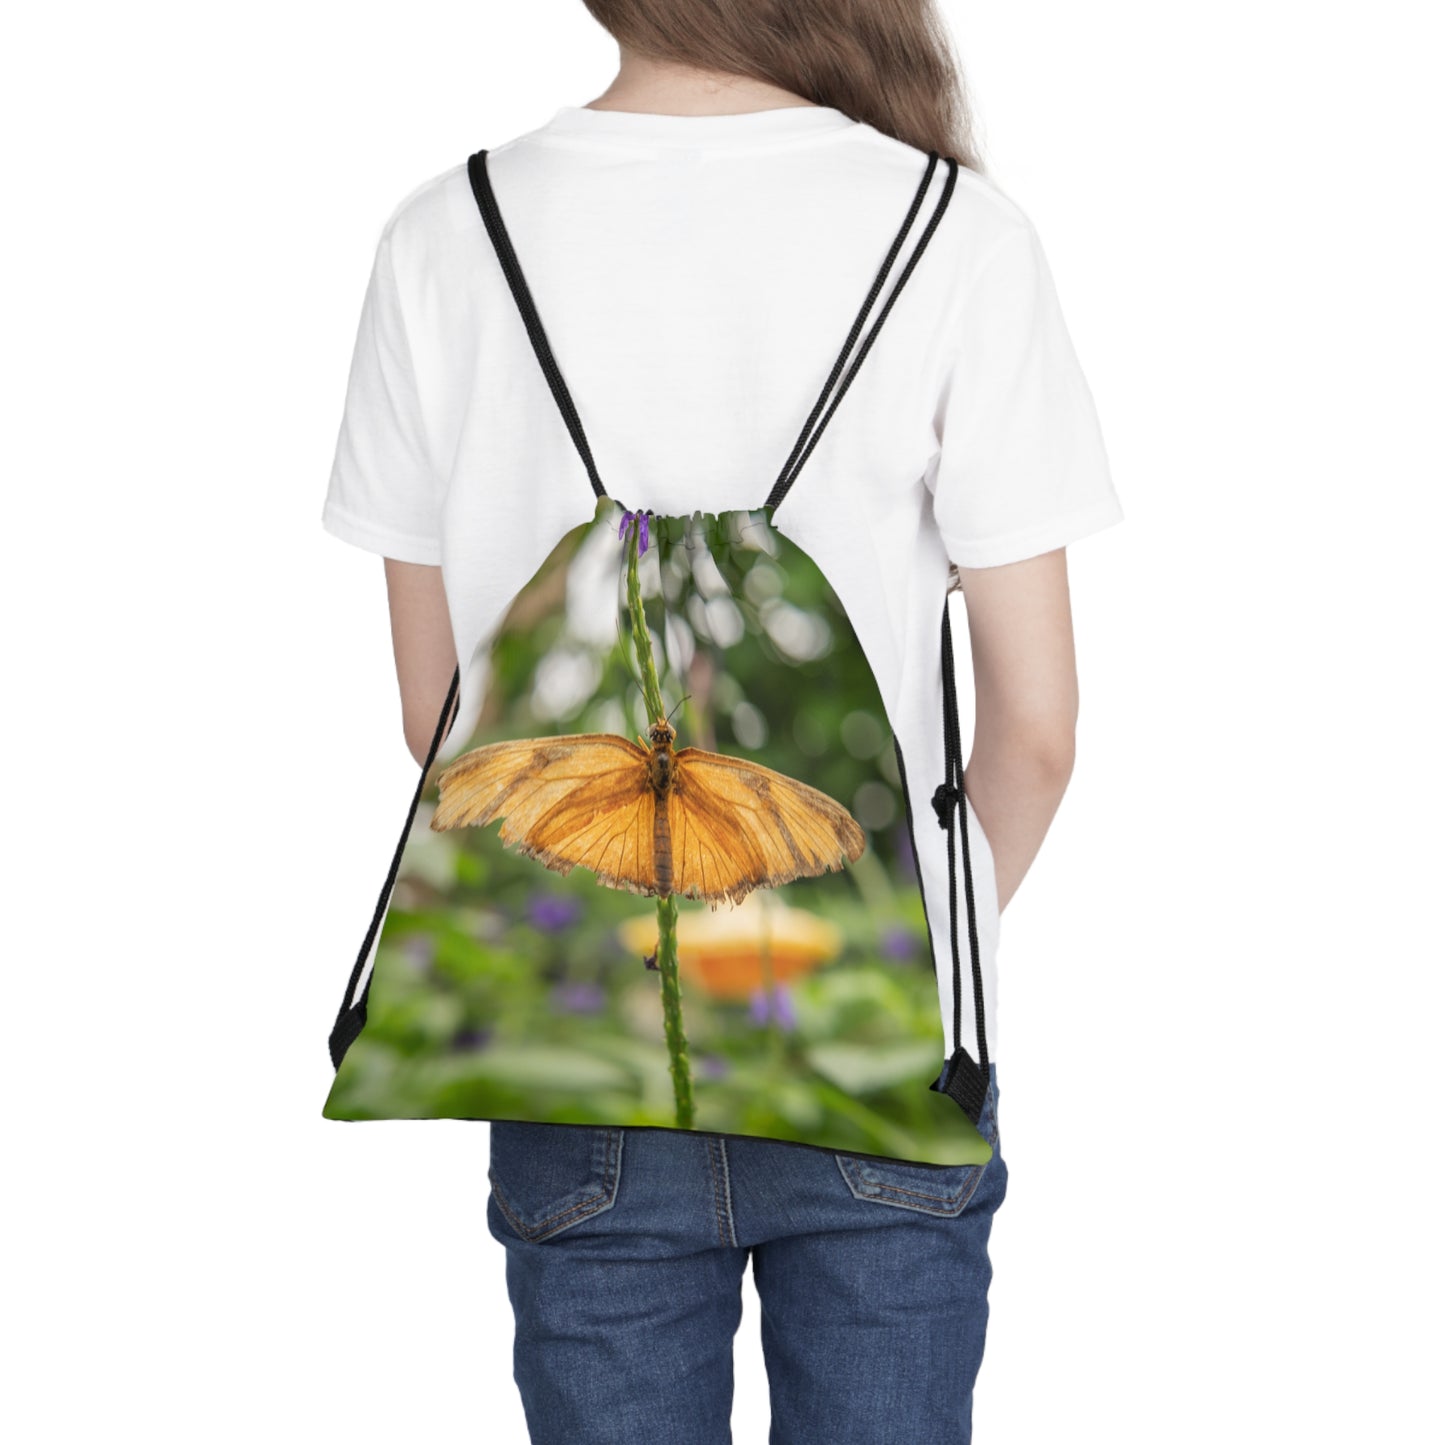 Spring In The Air - Outdoor Drawstring Bag